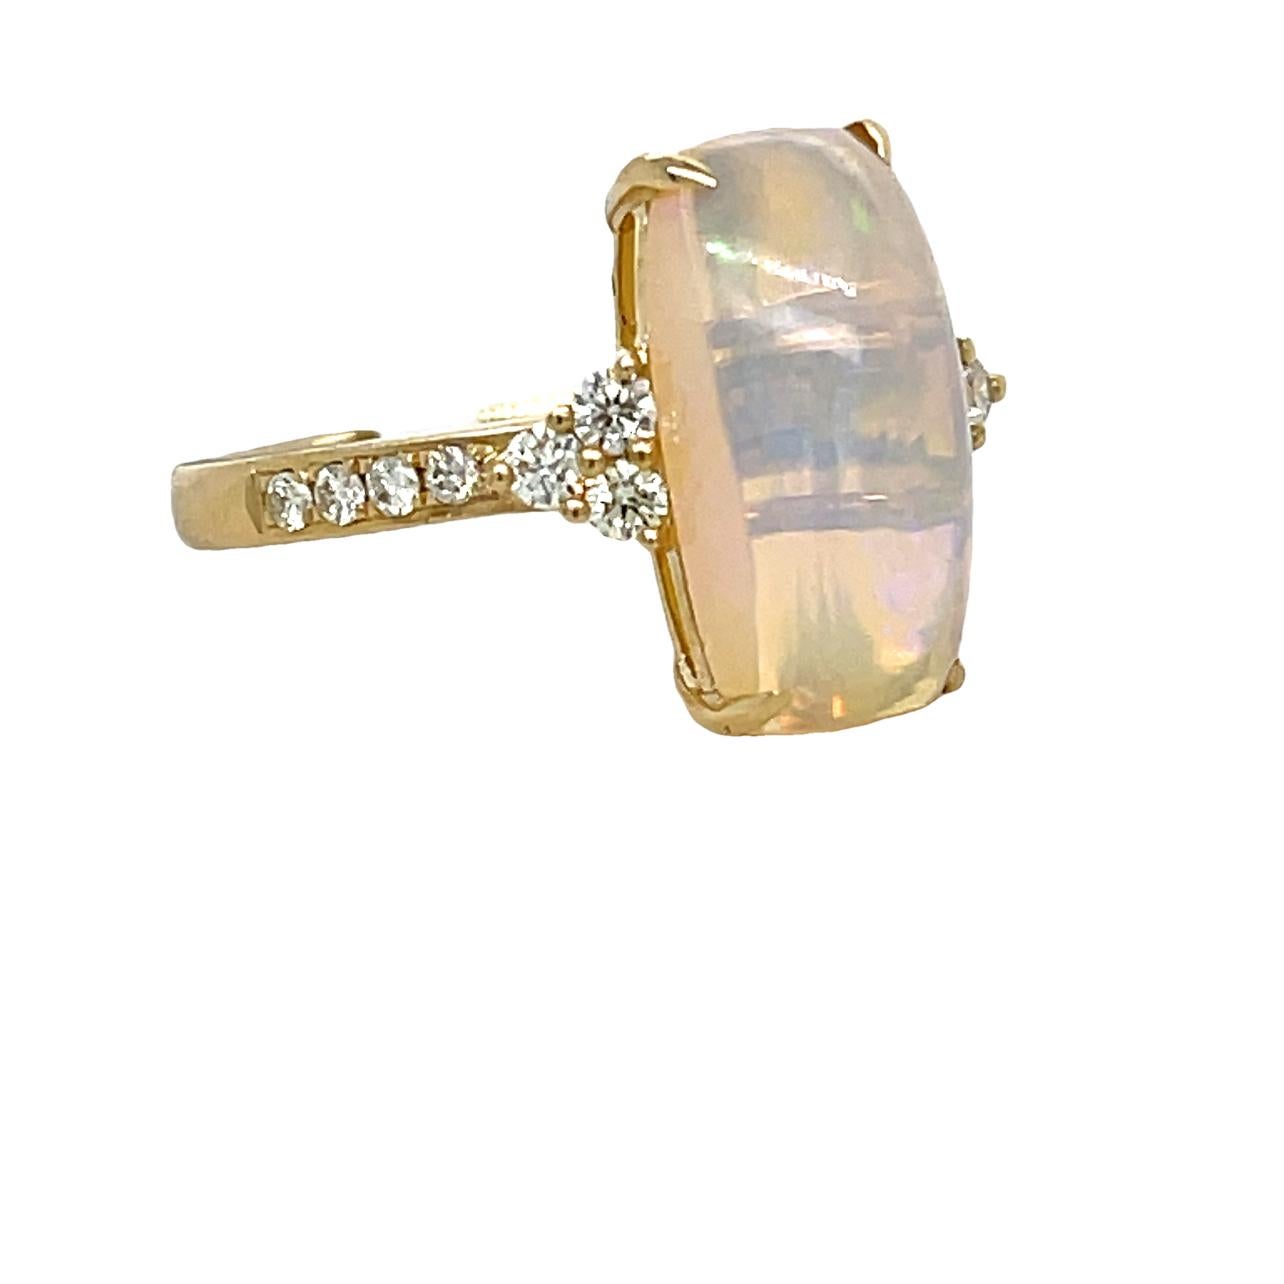 This stunning ring has a 14.5x7.5 vibrant Ethiopian Opal with 14 brilliant cut round diamonds on the side and along the shank. The Opal is 4 prong set in 14K yellow gold. This beautiful ring will be the talk of your special event. This ring will be